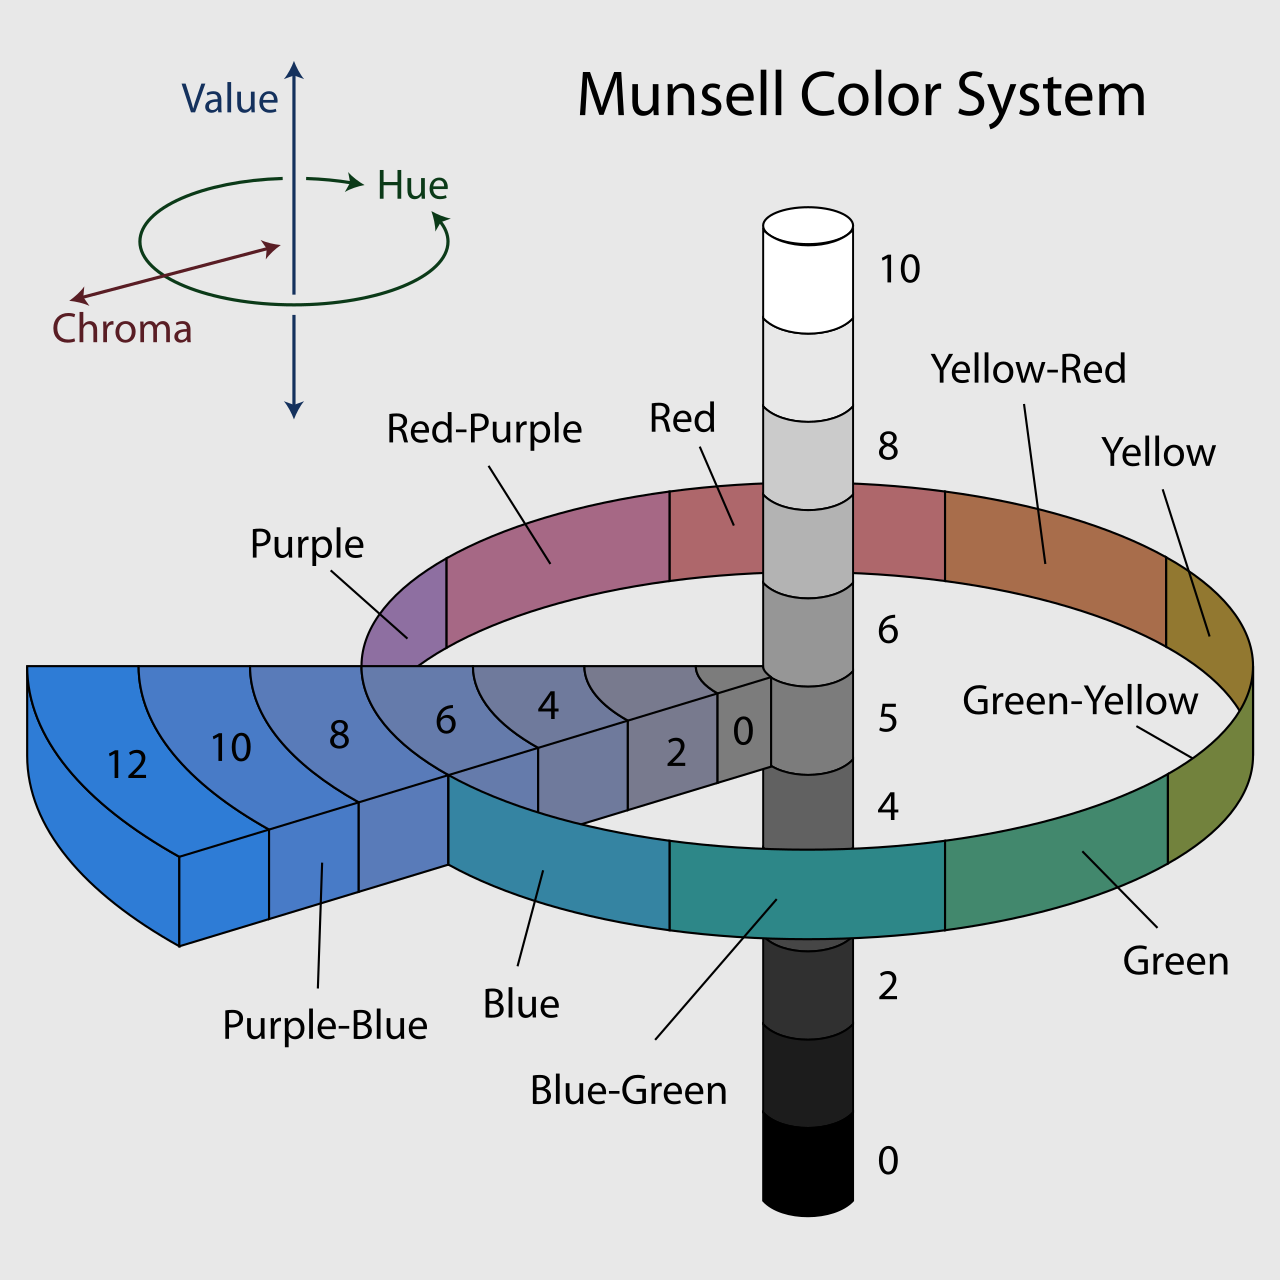 Munsell Color System Diagram